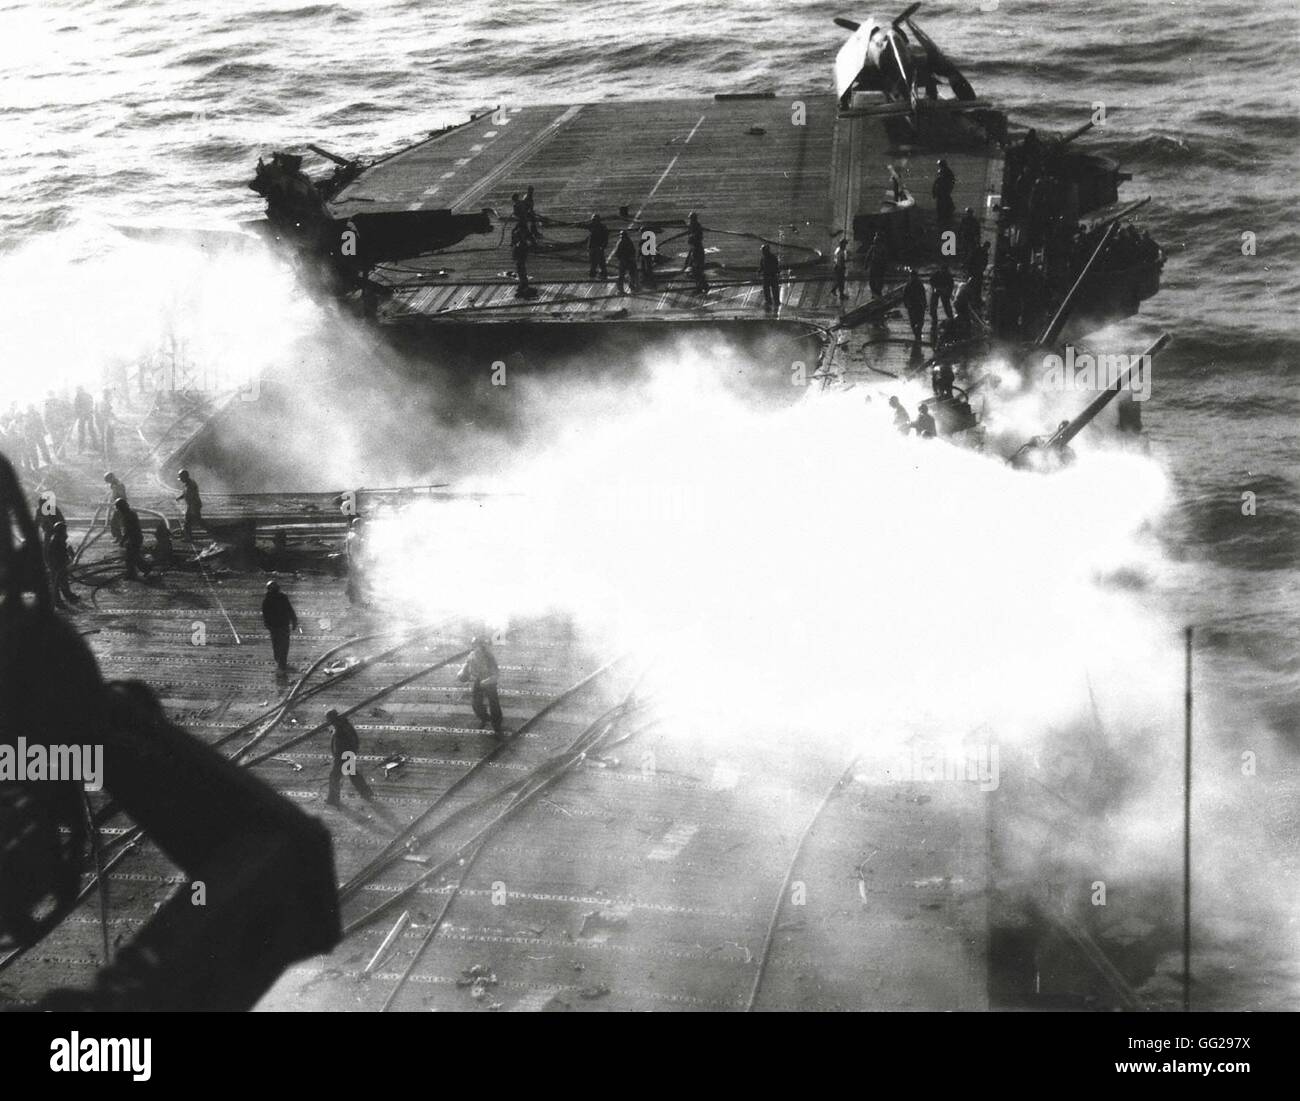 Deck of U.S. warship 'Enterprise', after the attack of a Japanese kamikaze aircraft on May 14, 1945. National Archives, Washington Stock Photo